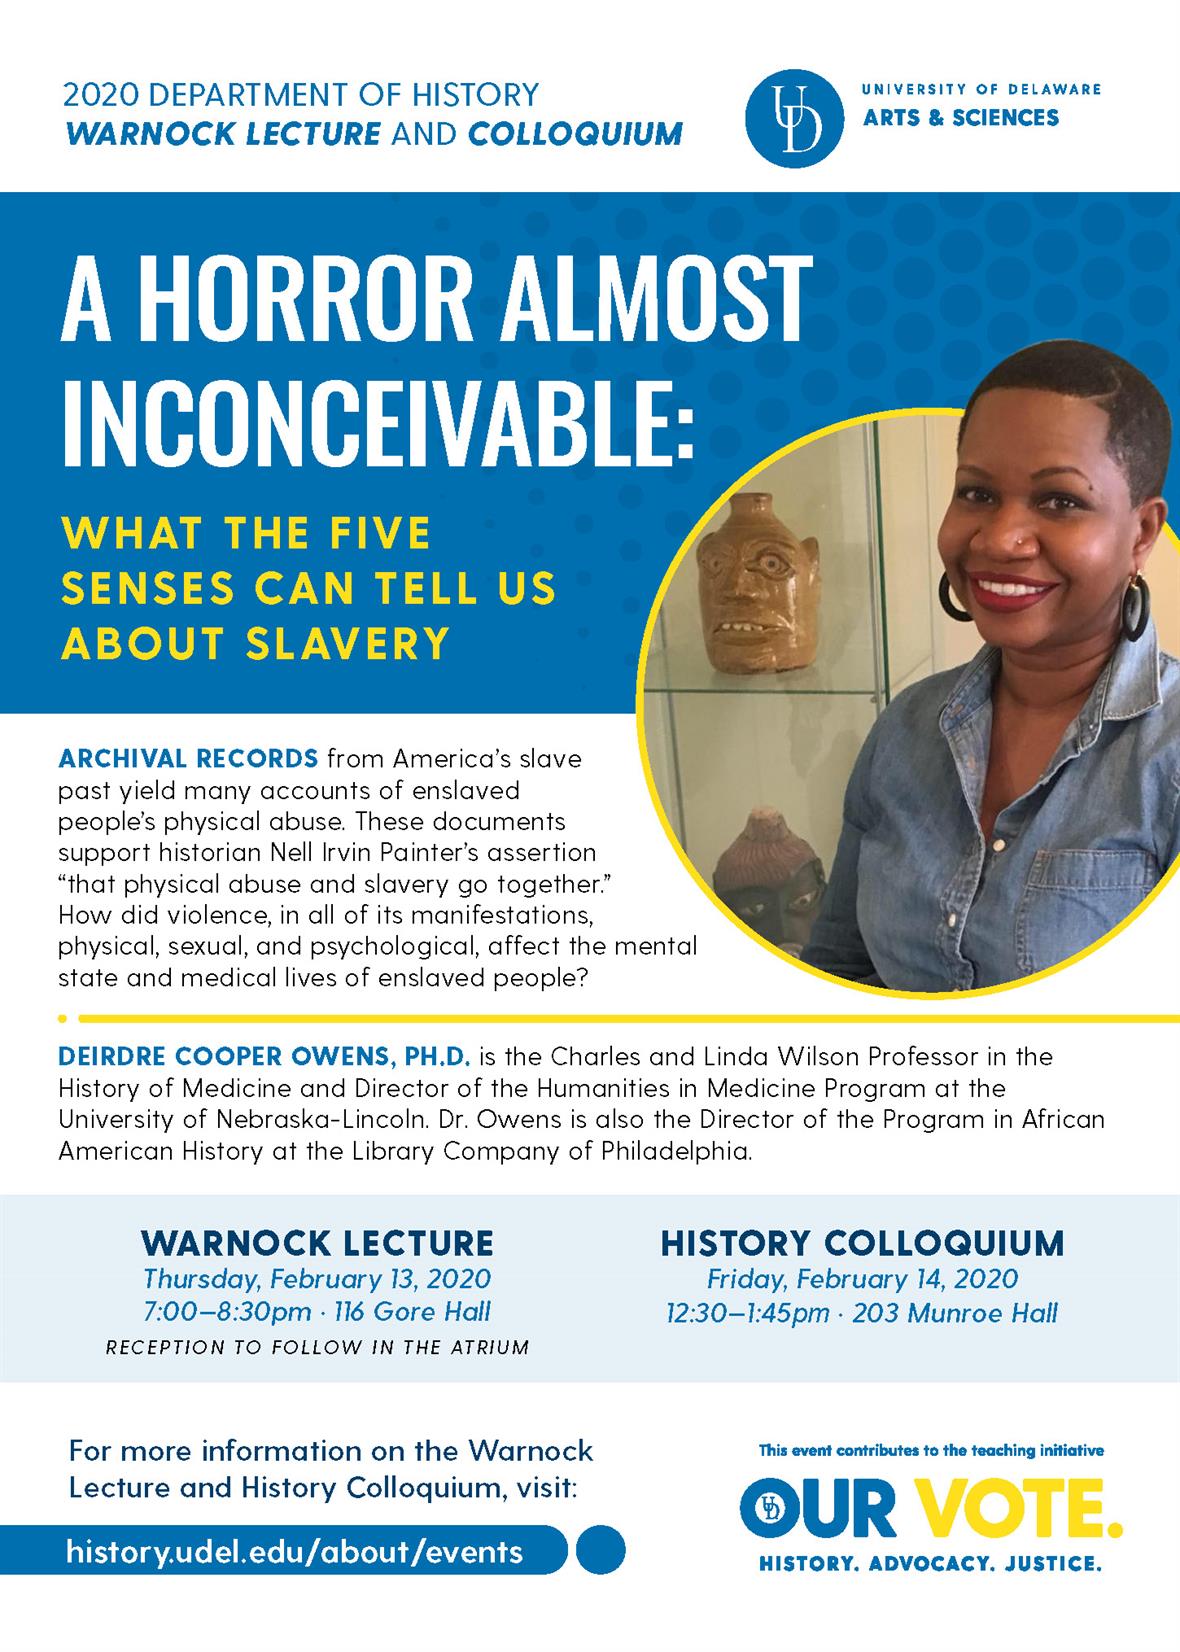 2020 Warnock Lecture and History Colloquium with Deirdre Cooper Owens February 13 and 14